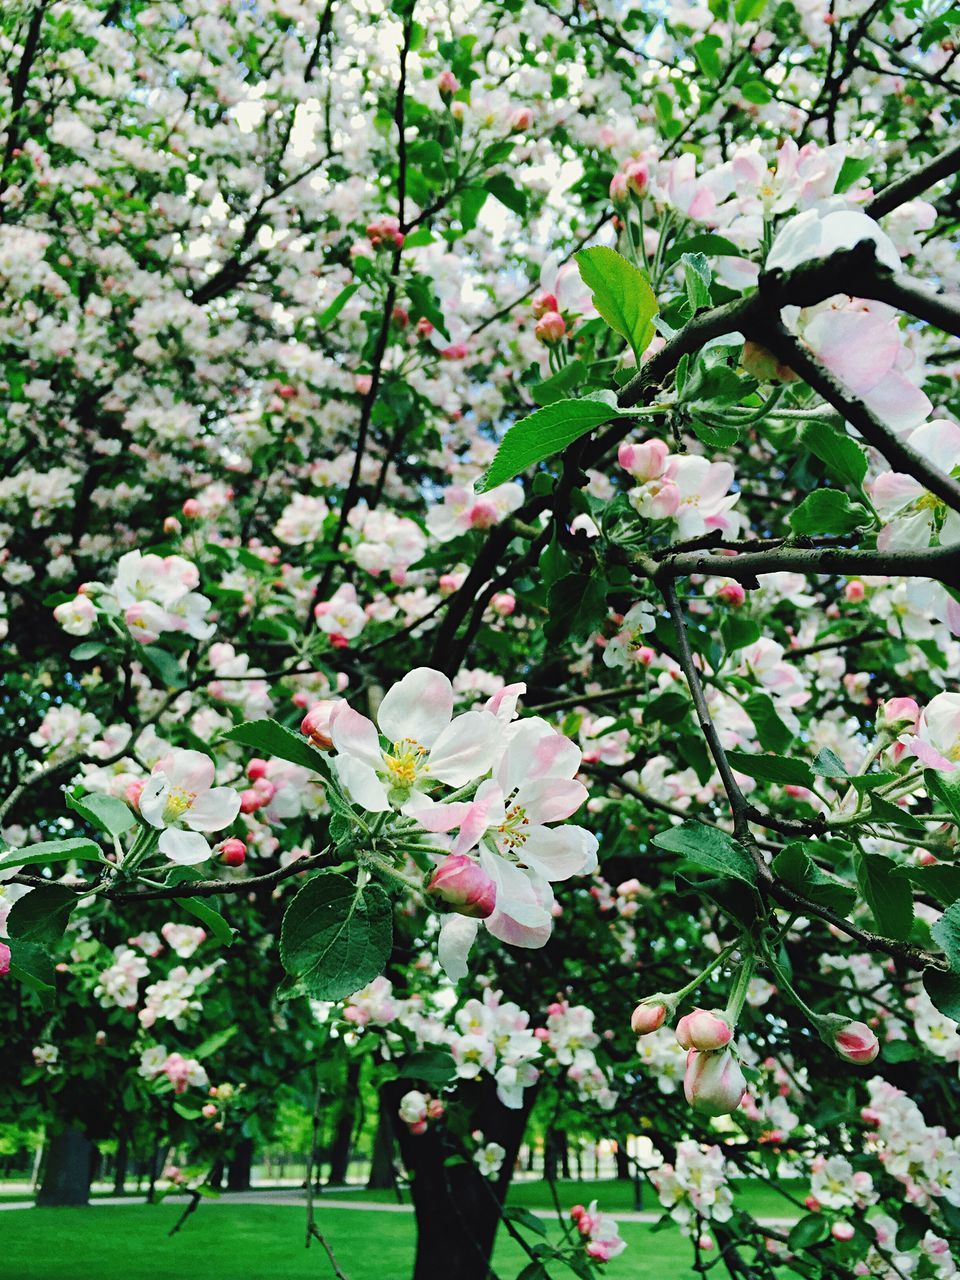 flower, growth, freshness, tree, branch, beauty in nature, nature, fragility, blossom, green color, park - man made space, blooming, in bloom, springtime, leaf, spring, pink color, white color, day, tranquility